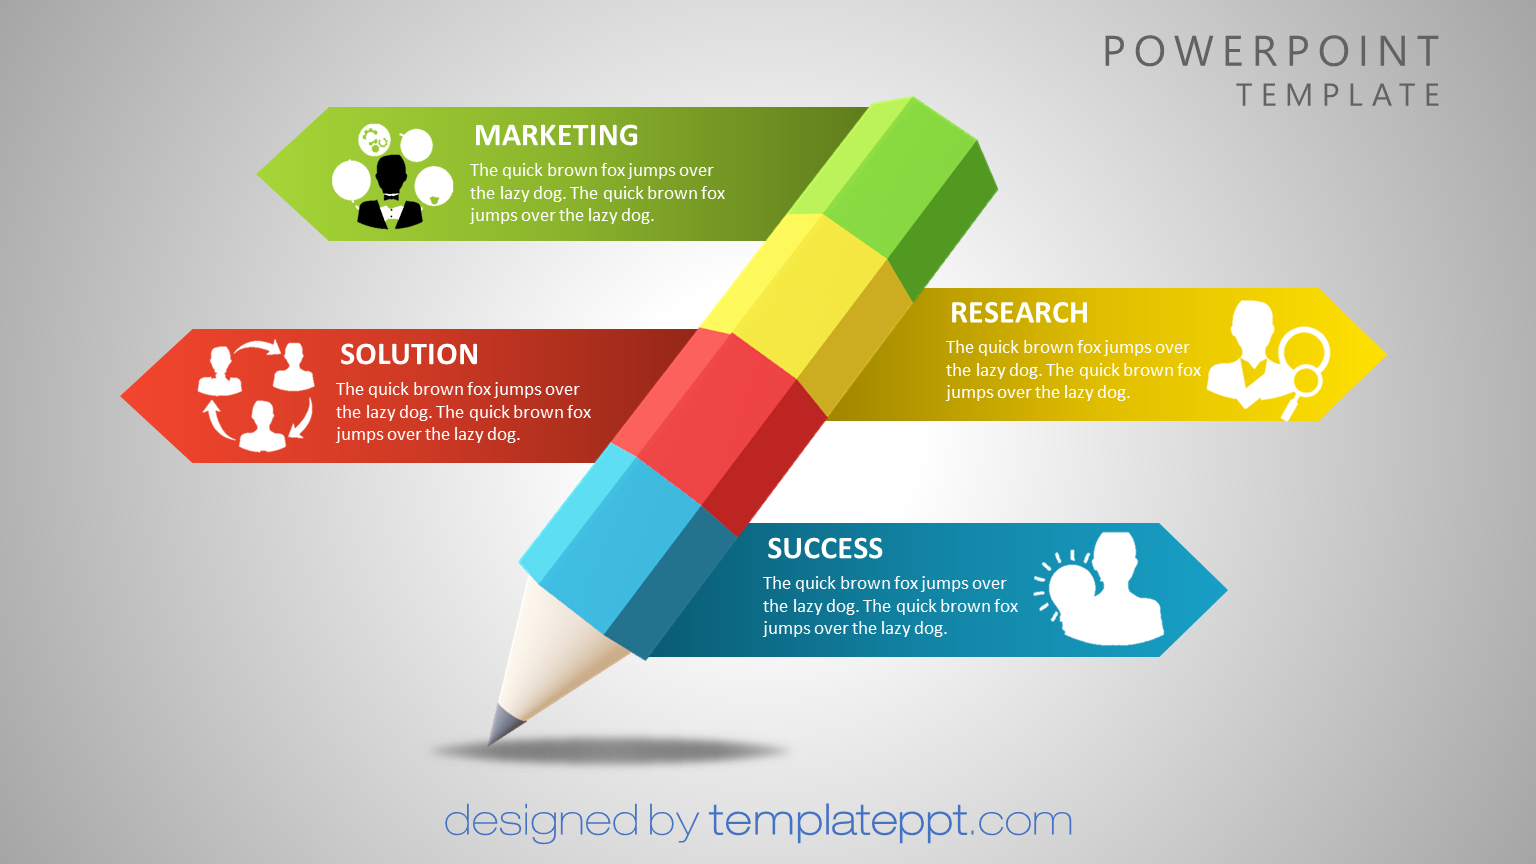 024 Animated Powerpoint Template Free Download Ideas In Powerpoint 2007 Template Free Download